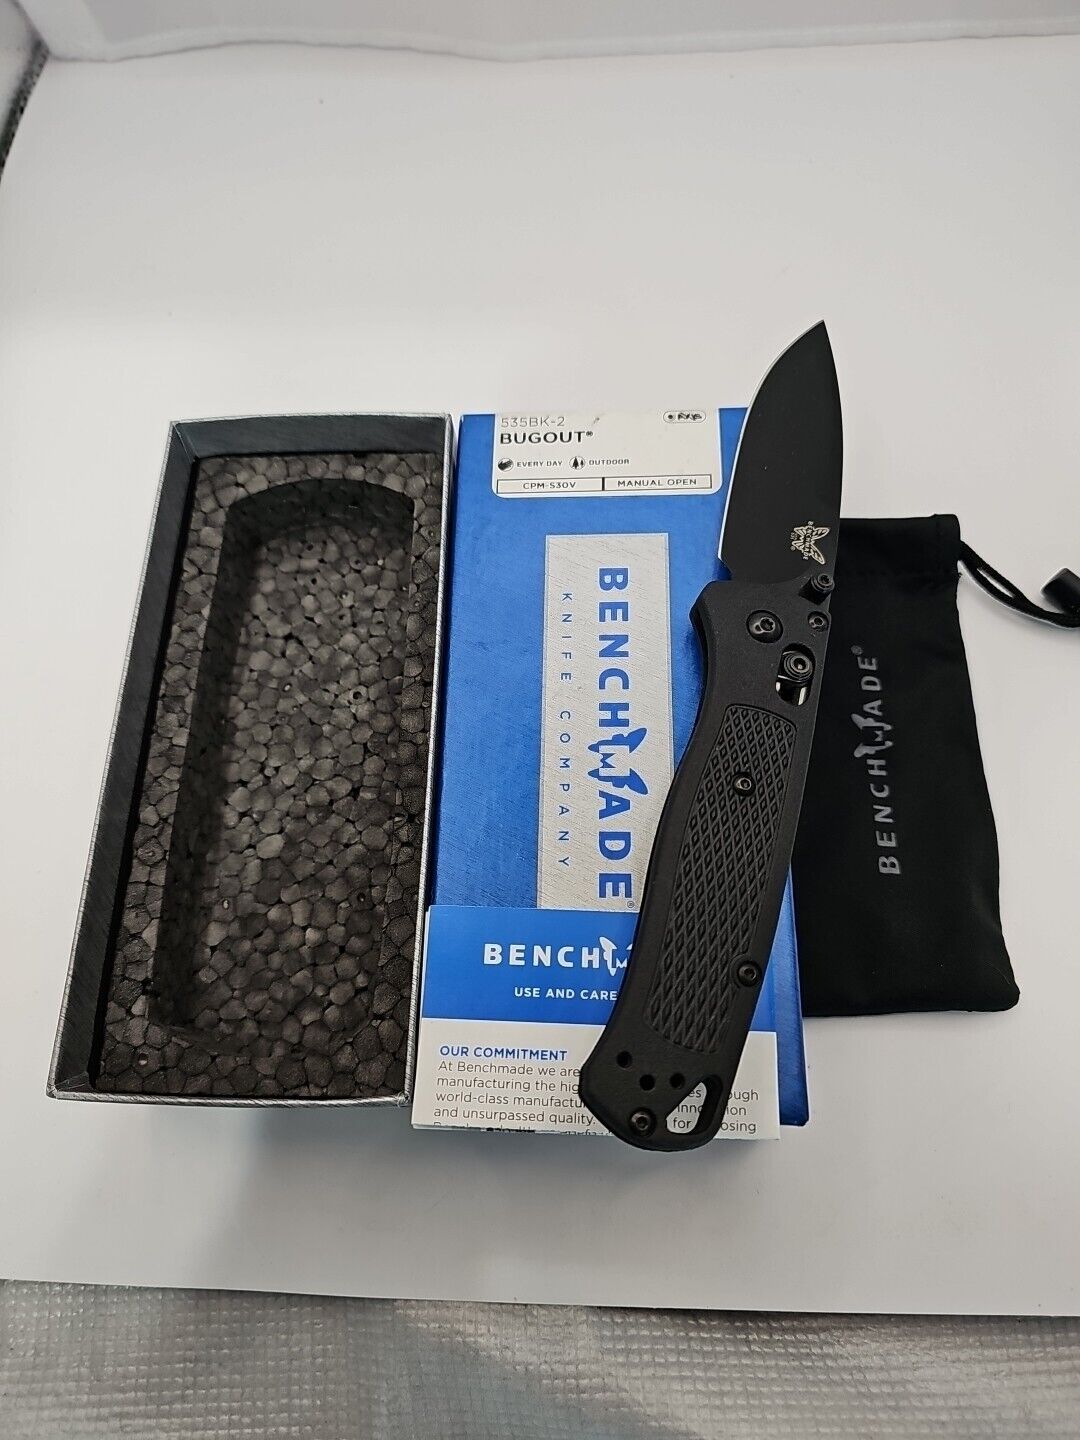 Benchmade Knives Bugout 535BK-2 Black CPM-S30V Stainless Steel Knife In Photos